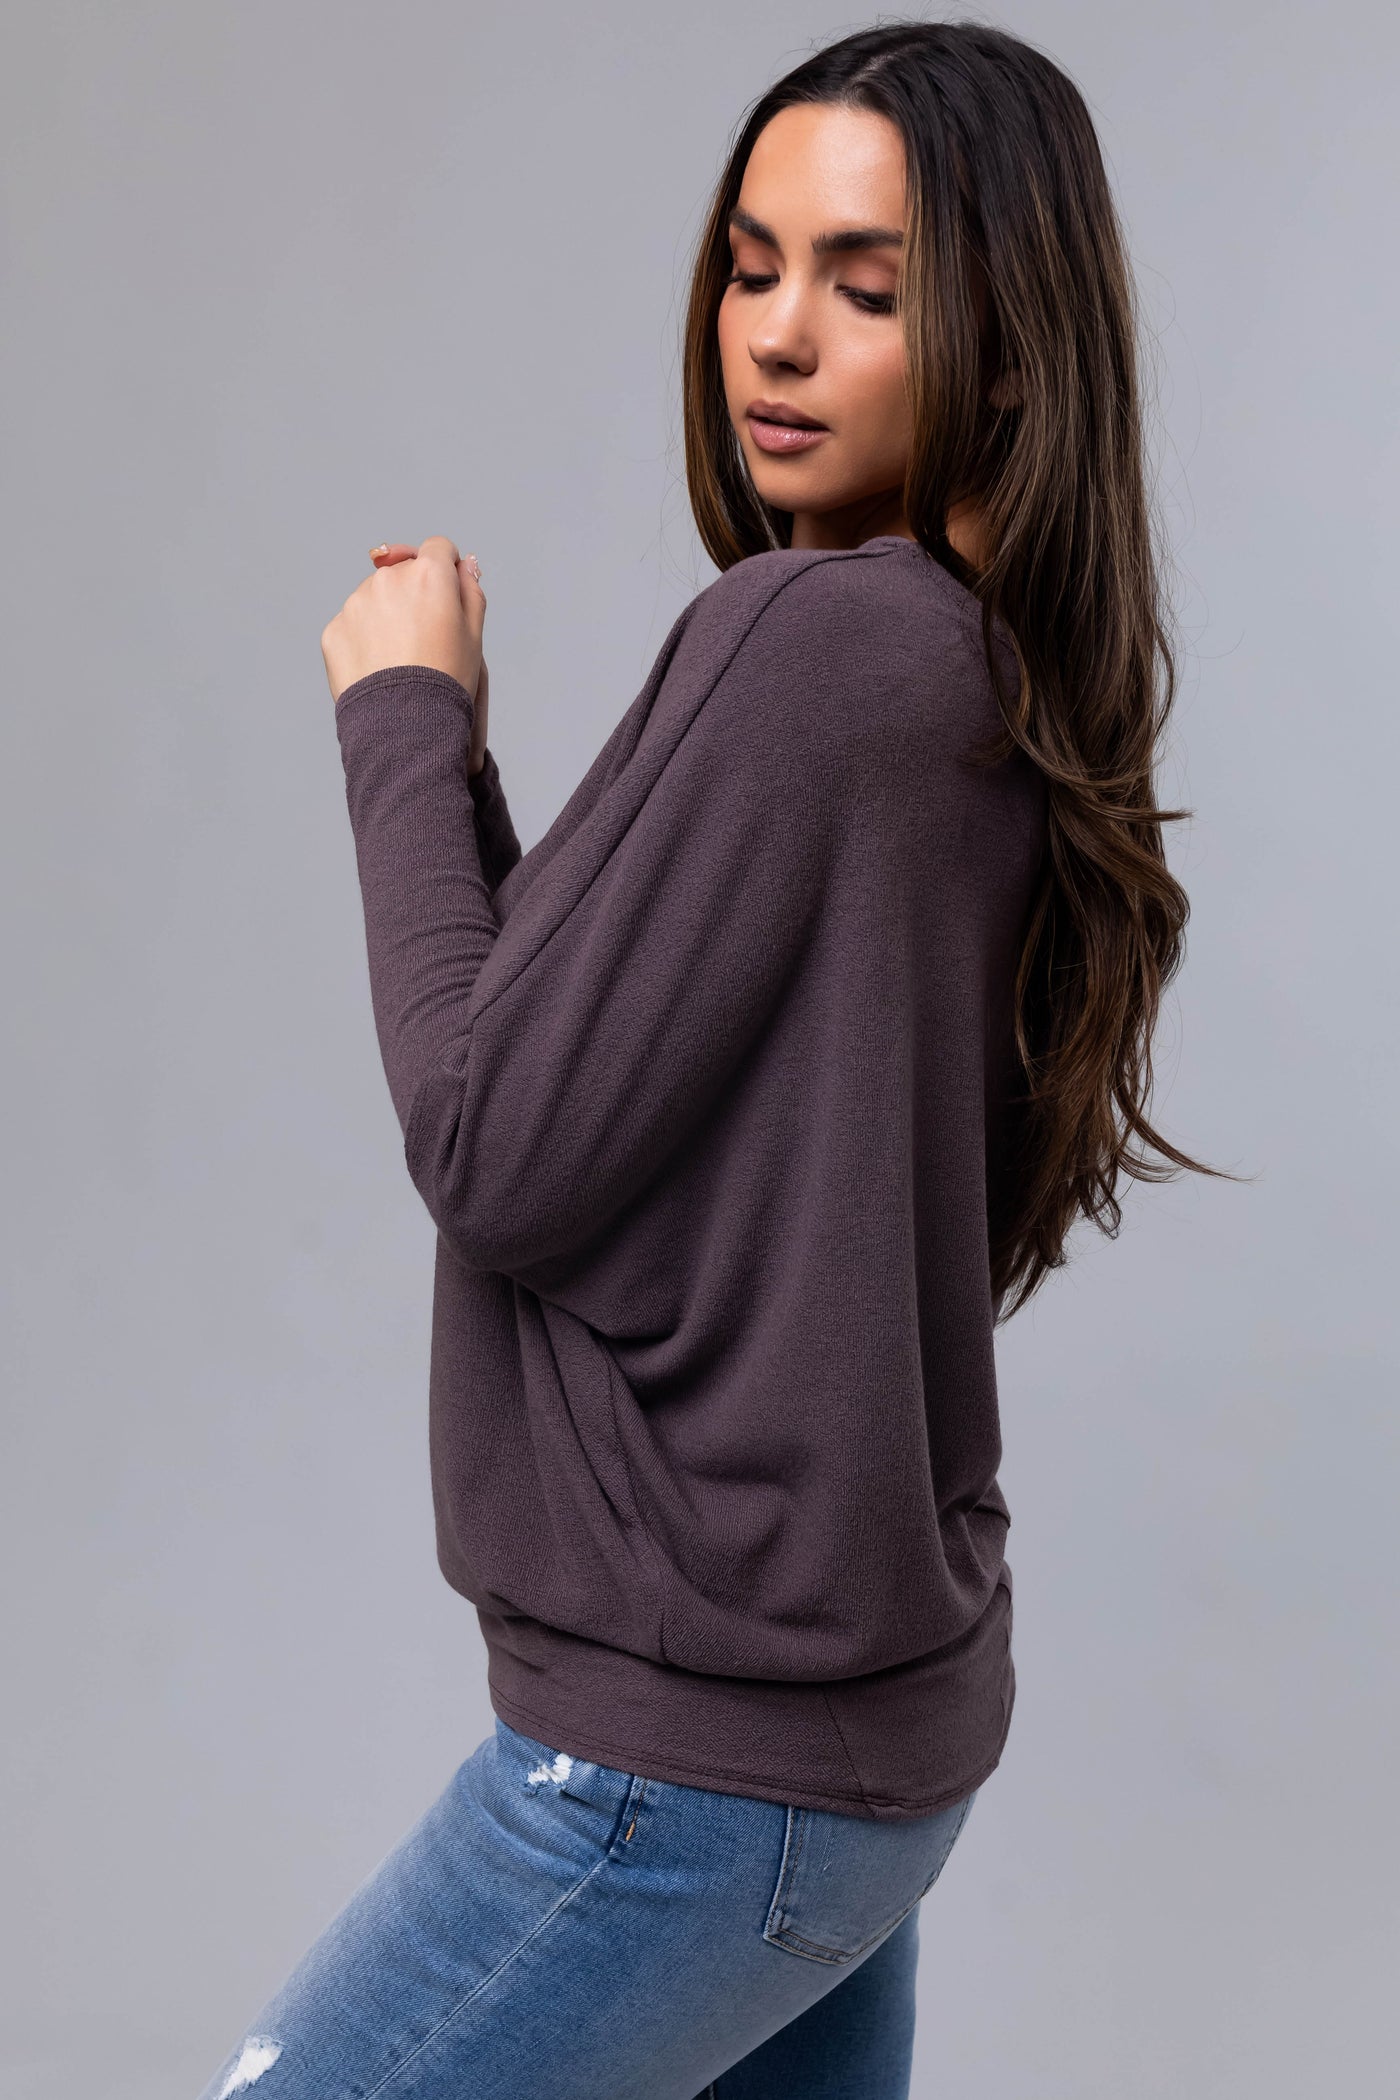 Dark Mocha Round Neck Knit Top with Long Dolman Sleeves